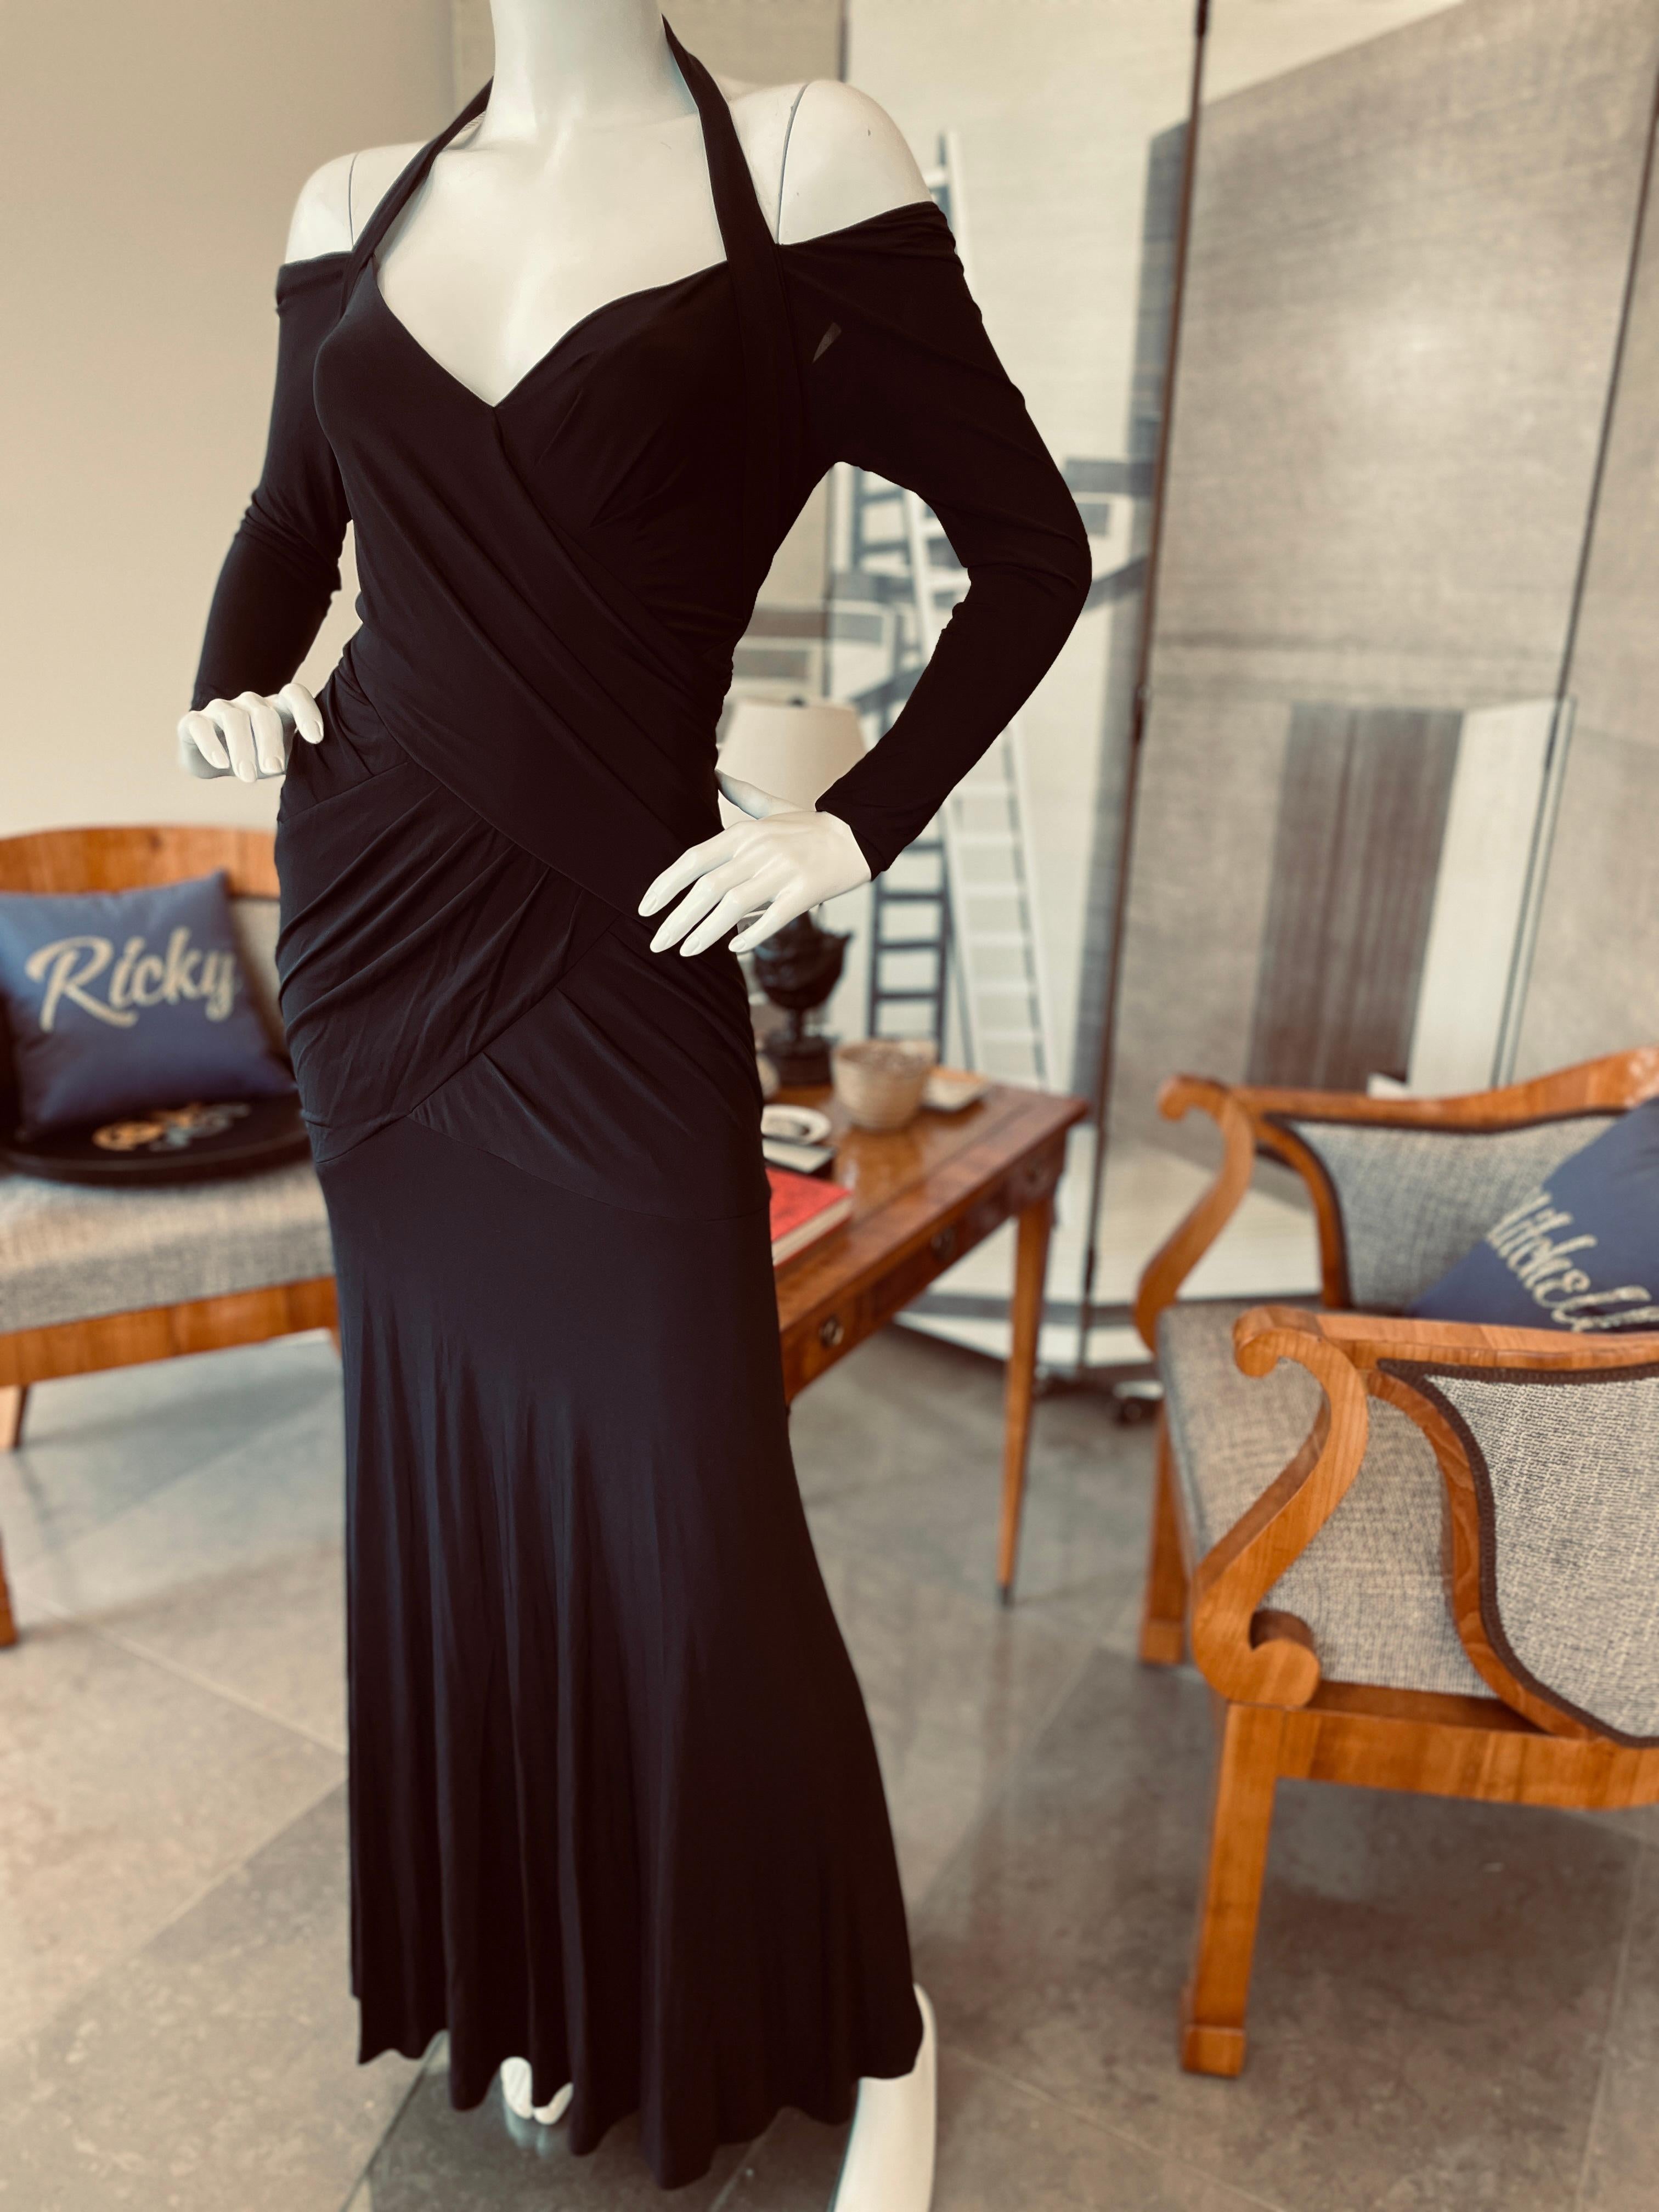 Donna Karan Vintage 1990's Plunging Black Cold Shoulder Jersey Evening Dress
Size M, there is a lot of stretch
Bust 34